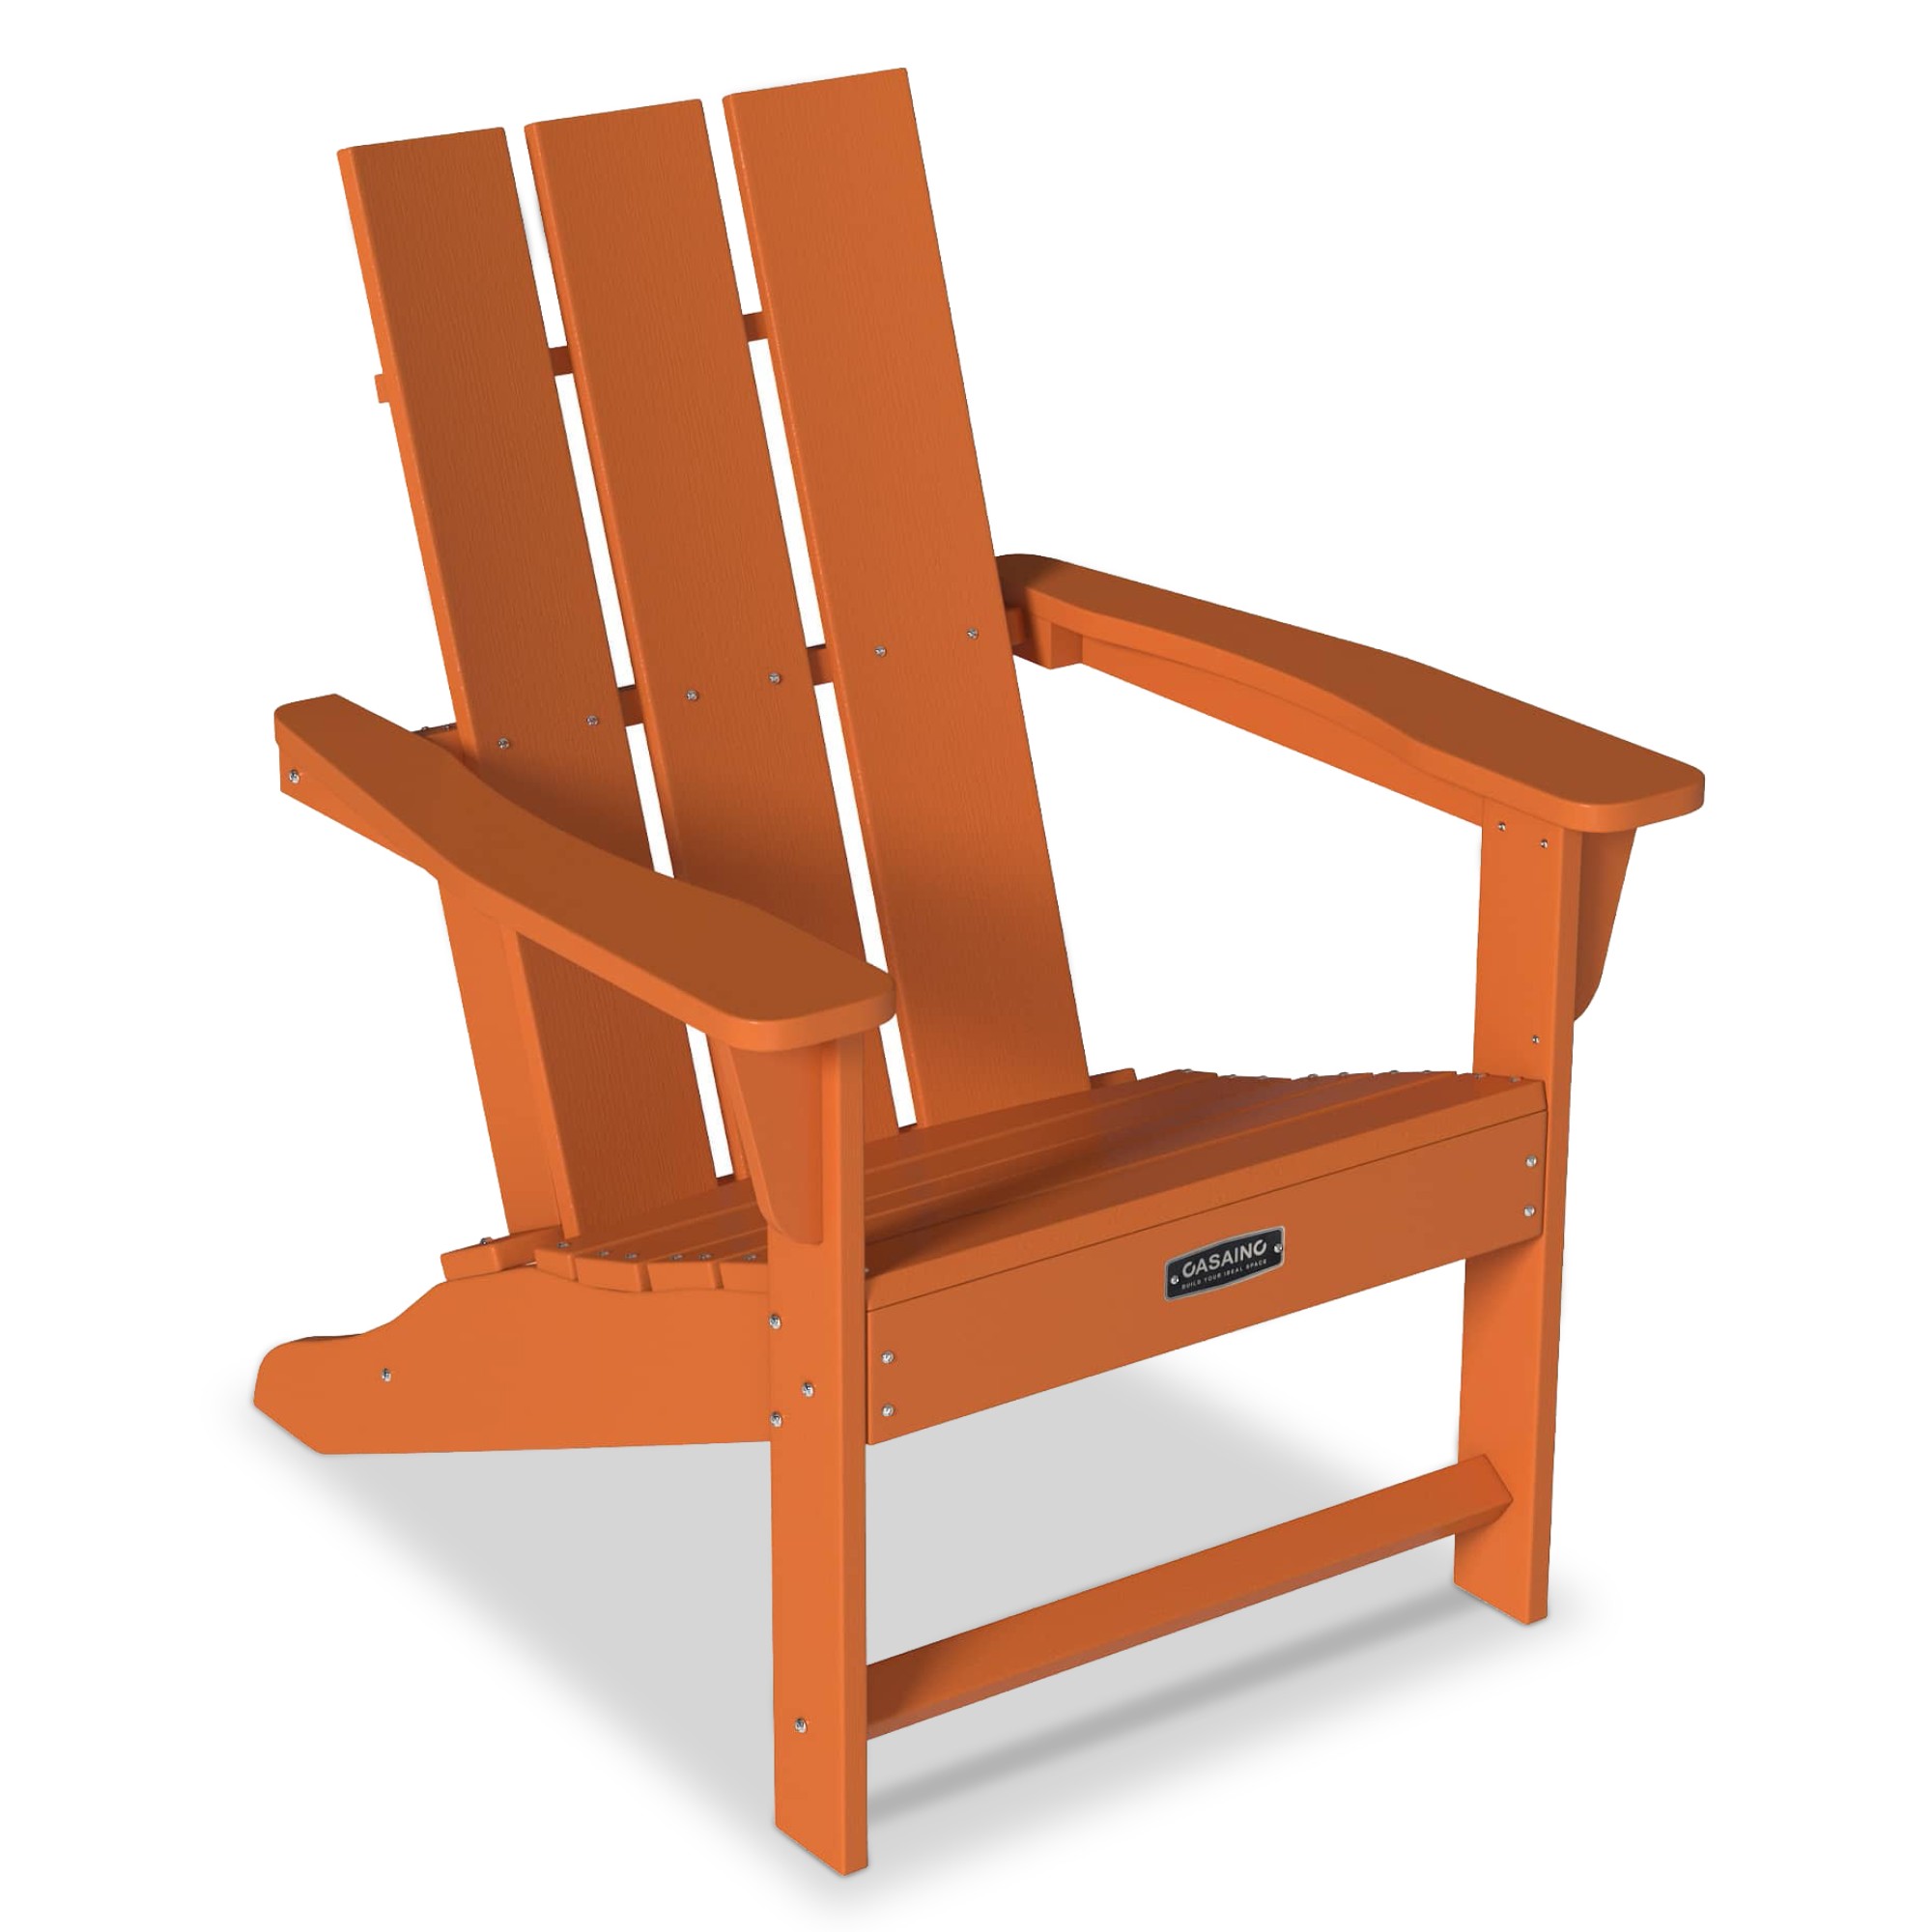 PS Board 3 back panel design sense Outdoor Adirondack chair, widened armrests 4.7 inches